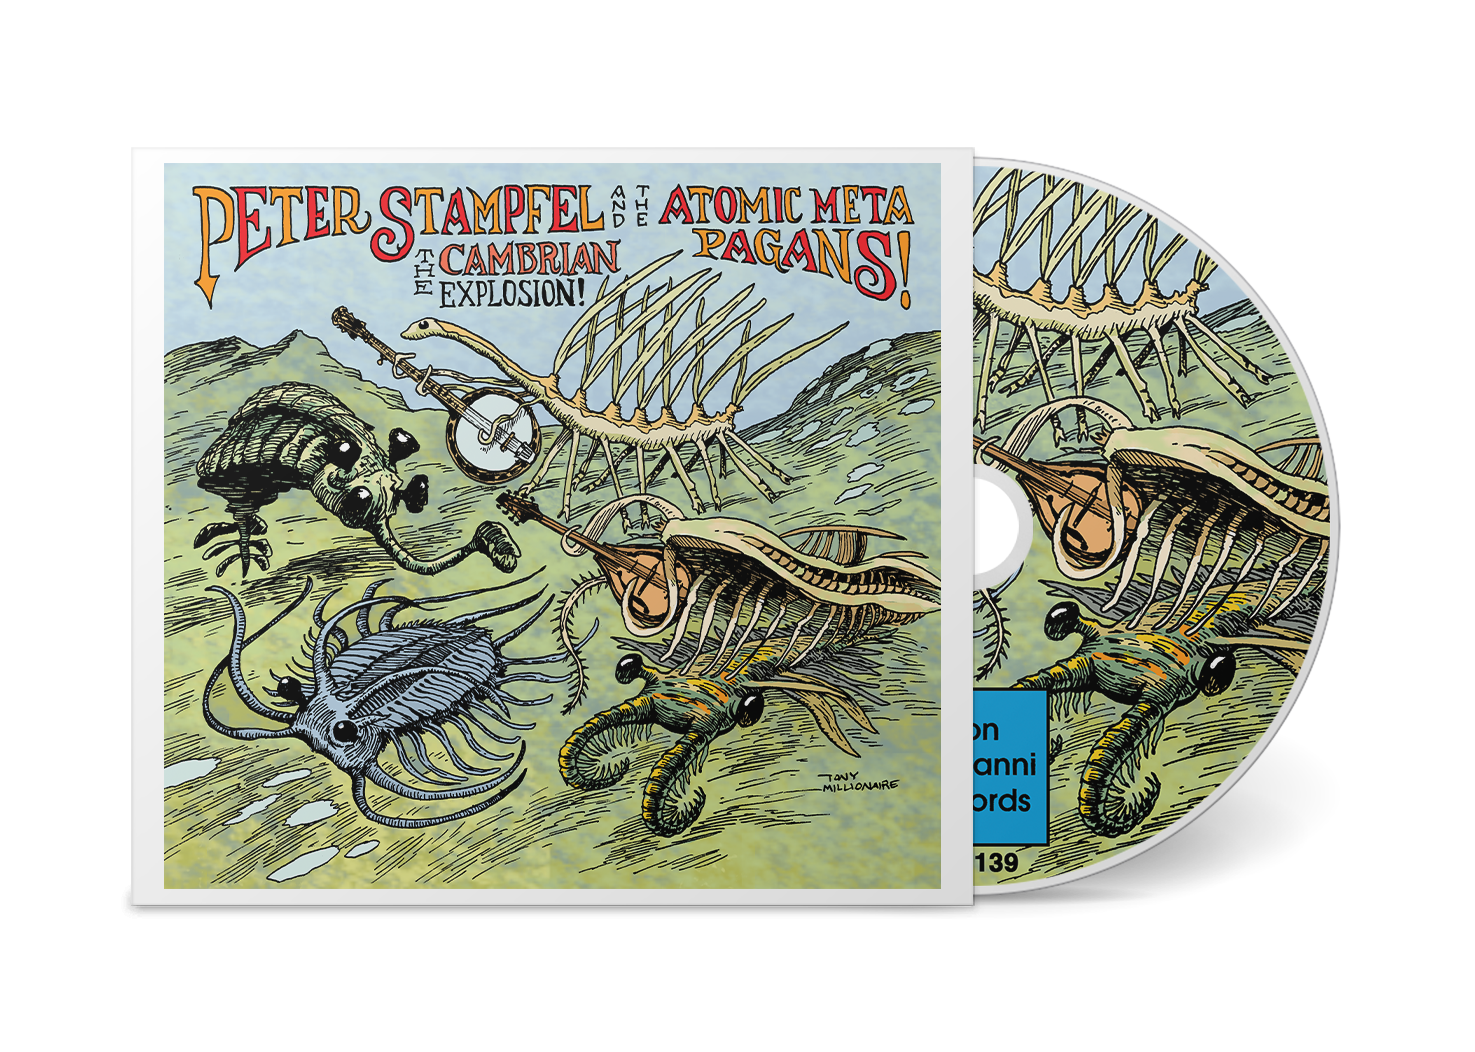 Peter Stampfel and the Atomic Meta Pagans "The Cambrian Explosion" CD